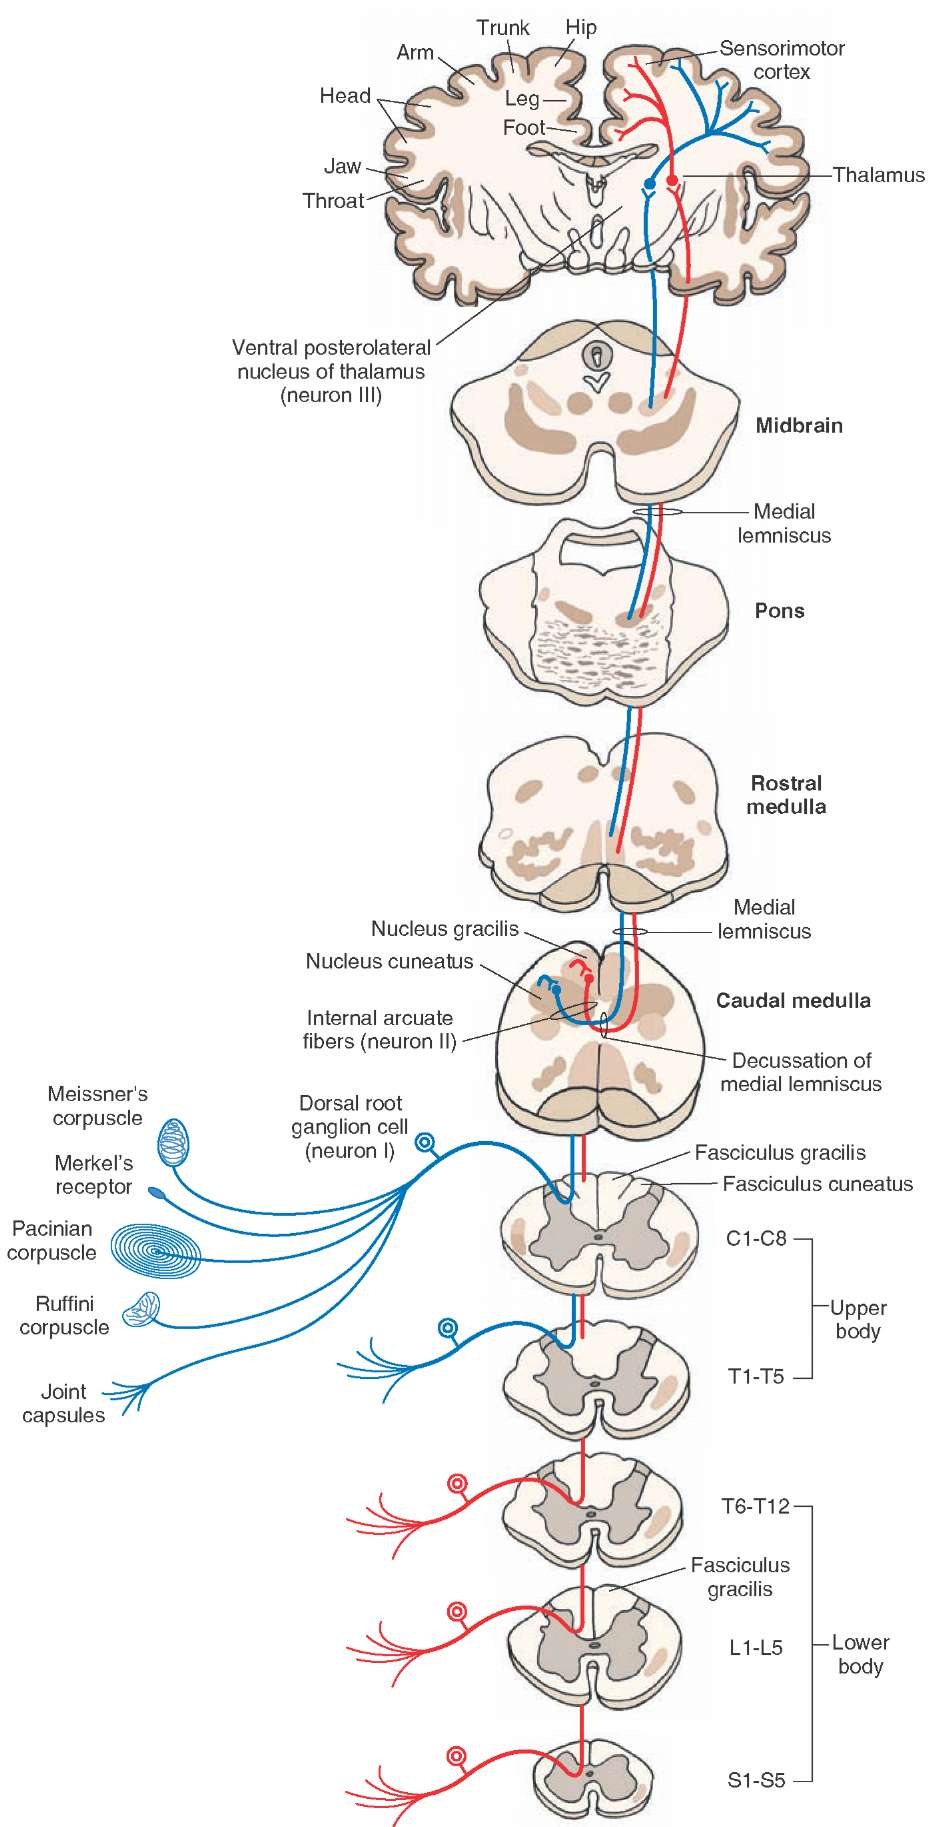 Diagram showing the course of fibers in the dorsal column. The fasciculus gracilis exists at all levels of the spinal cord and contains long ascending fibers from the lower limbs (shown in red). The fasciculus cuneatus exists in thoracic (T) segments above T6 (T1-T6) and cervical (C) segments (C1-C8) and contains long ascending fibers from the upper limbs (shown in blue). The axons of second-order neurons (neuron II) in the nucleus gracilis and cuneatus travel as internal arcuate fibers and cross in the midline to form the medial lemniscus, which ascends through the medulla, pons, and midbrain and terminates in the contralat-eral ventral posterolateral nucleus of the thalamus. Axons of third-order neurons (neuron III) in the thalamus travel in the internal capsule and terminate in the senso-rimotor cerebral cortex. For other details, see text. neuron I = first-order neuron; L = lumbar; S = sacral. 